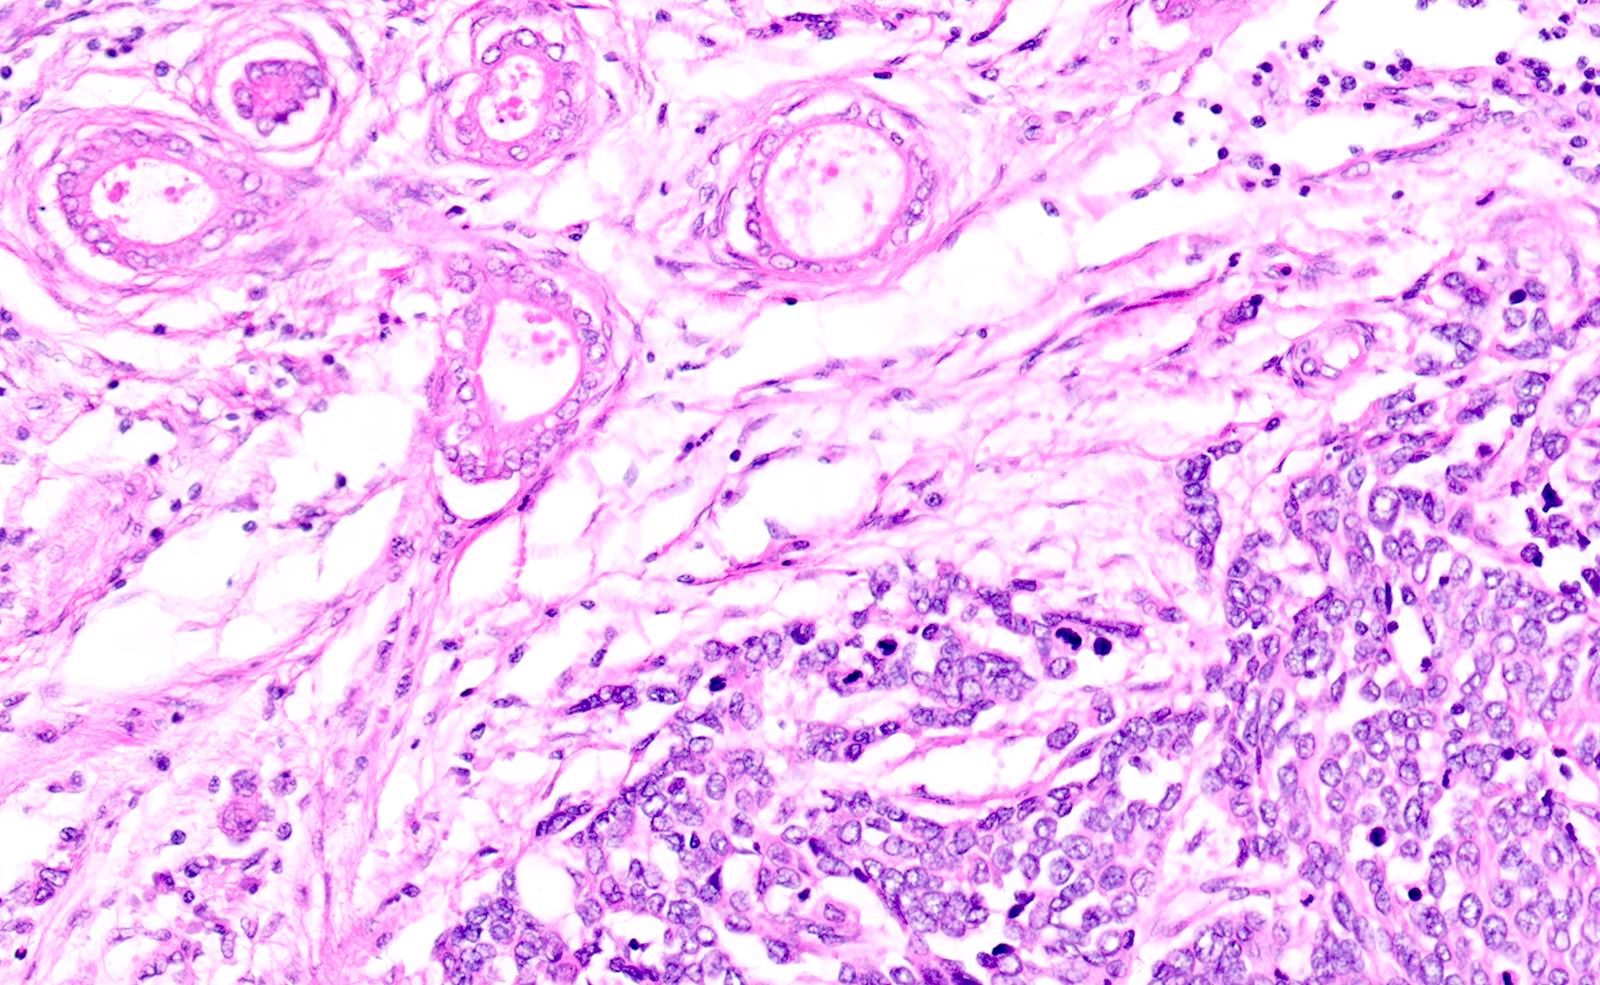 Mixed ductal neuroendocrine carcinoma